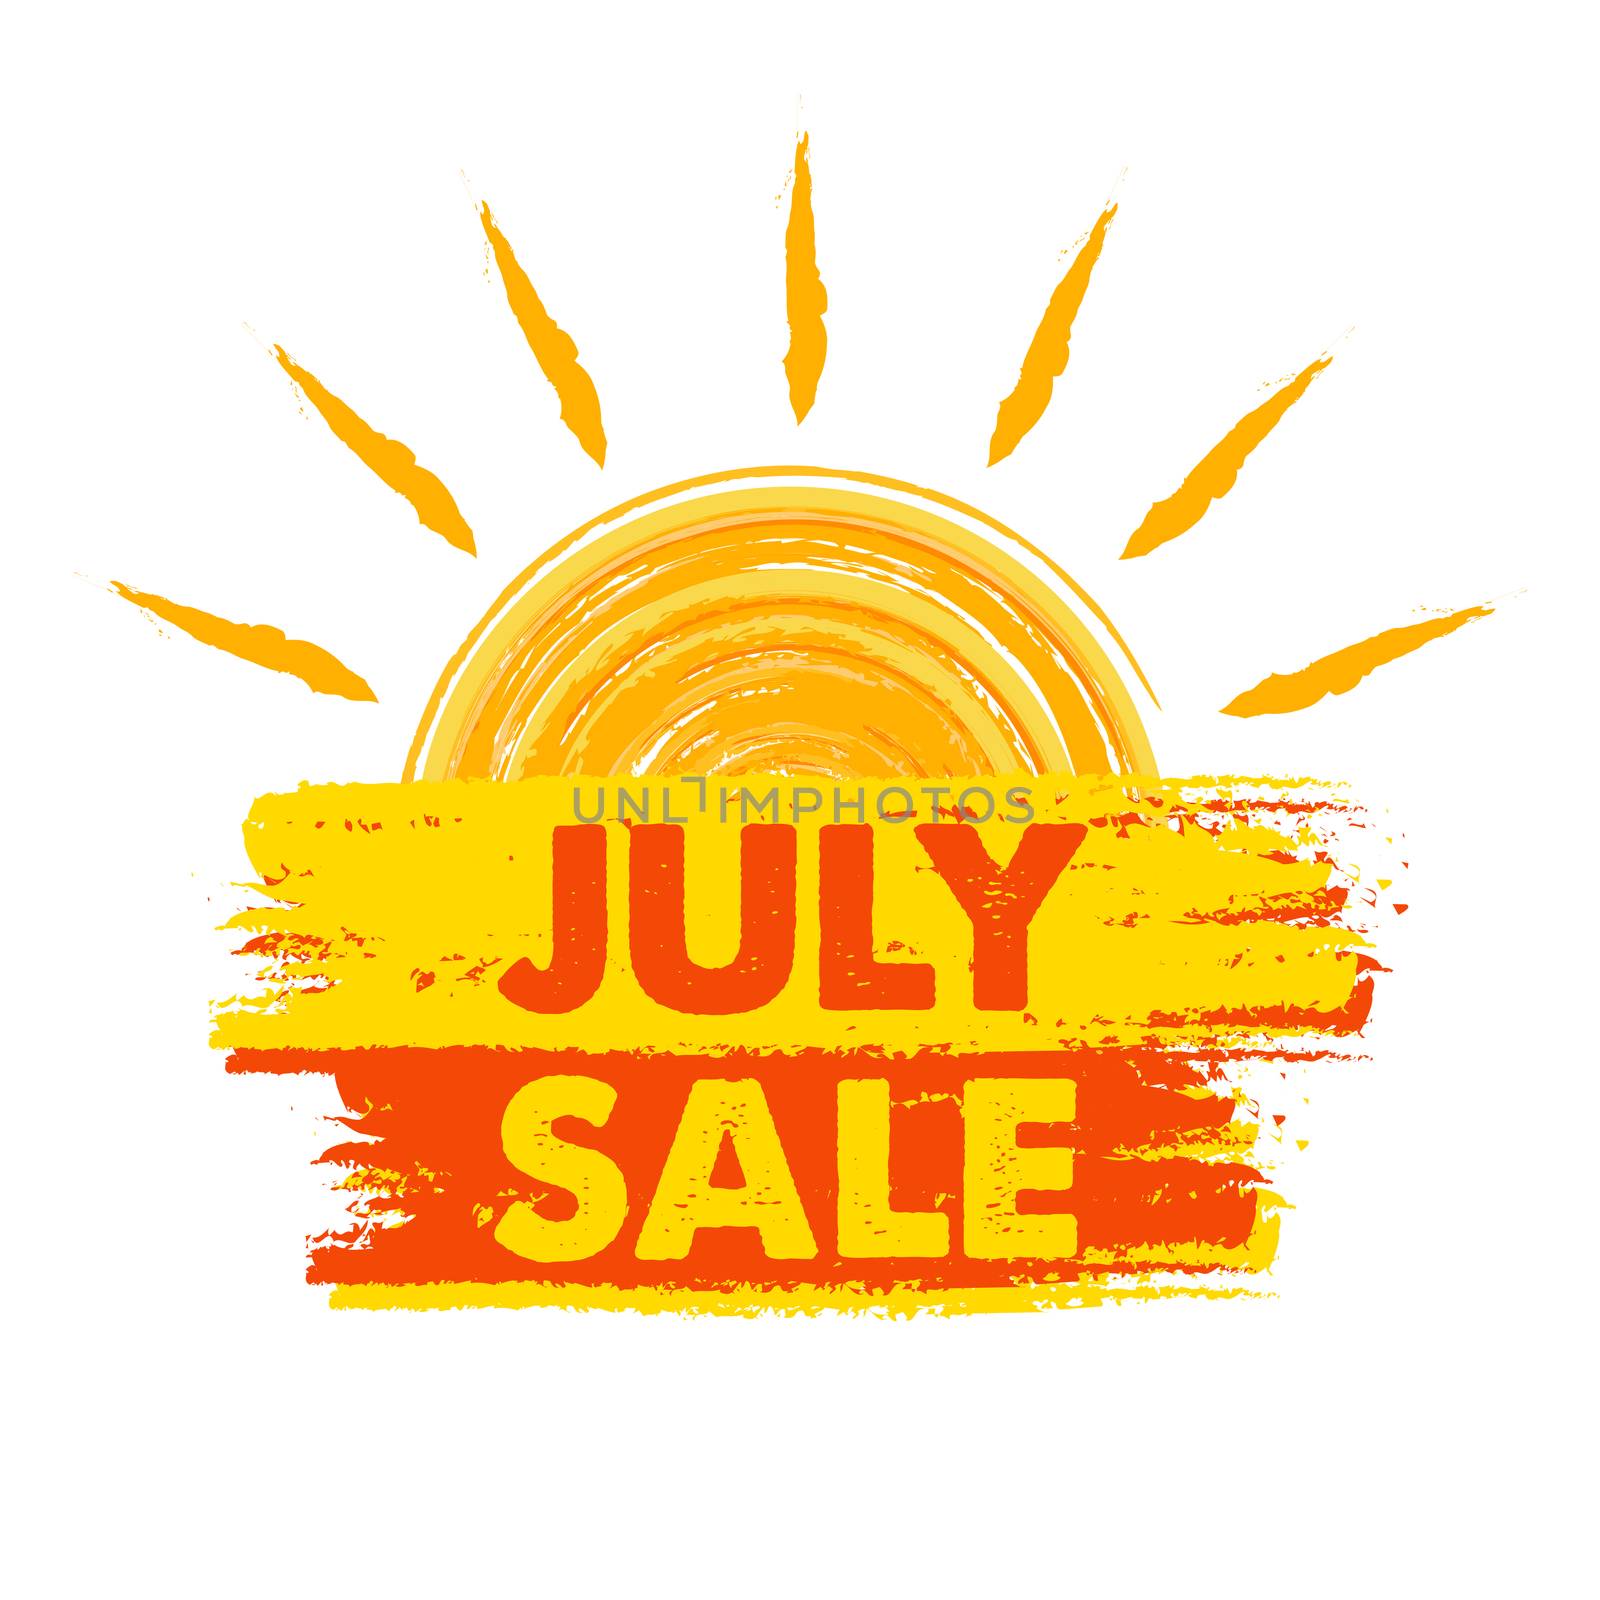 july sale with sun sign, yellow and orange drawn label
 by marinini